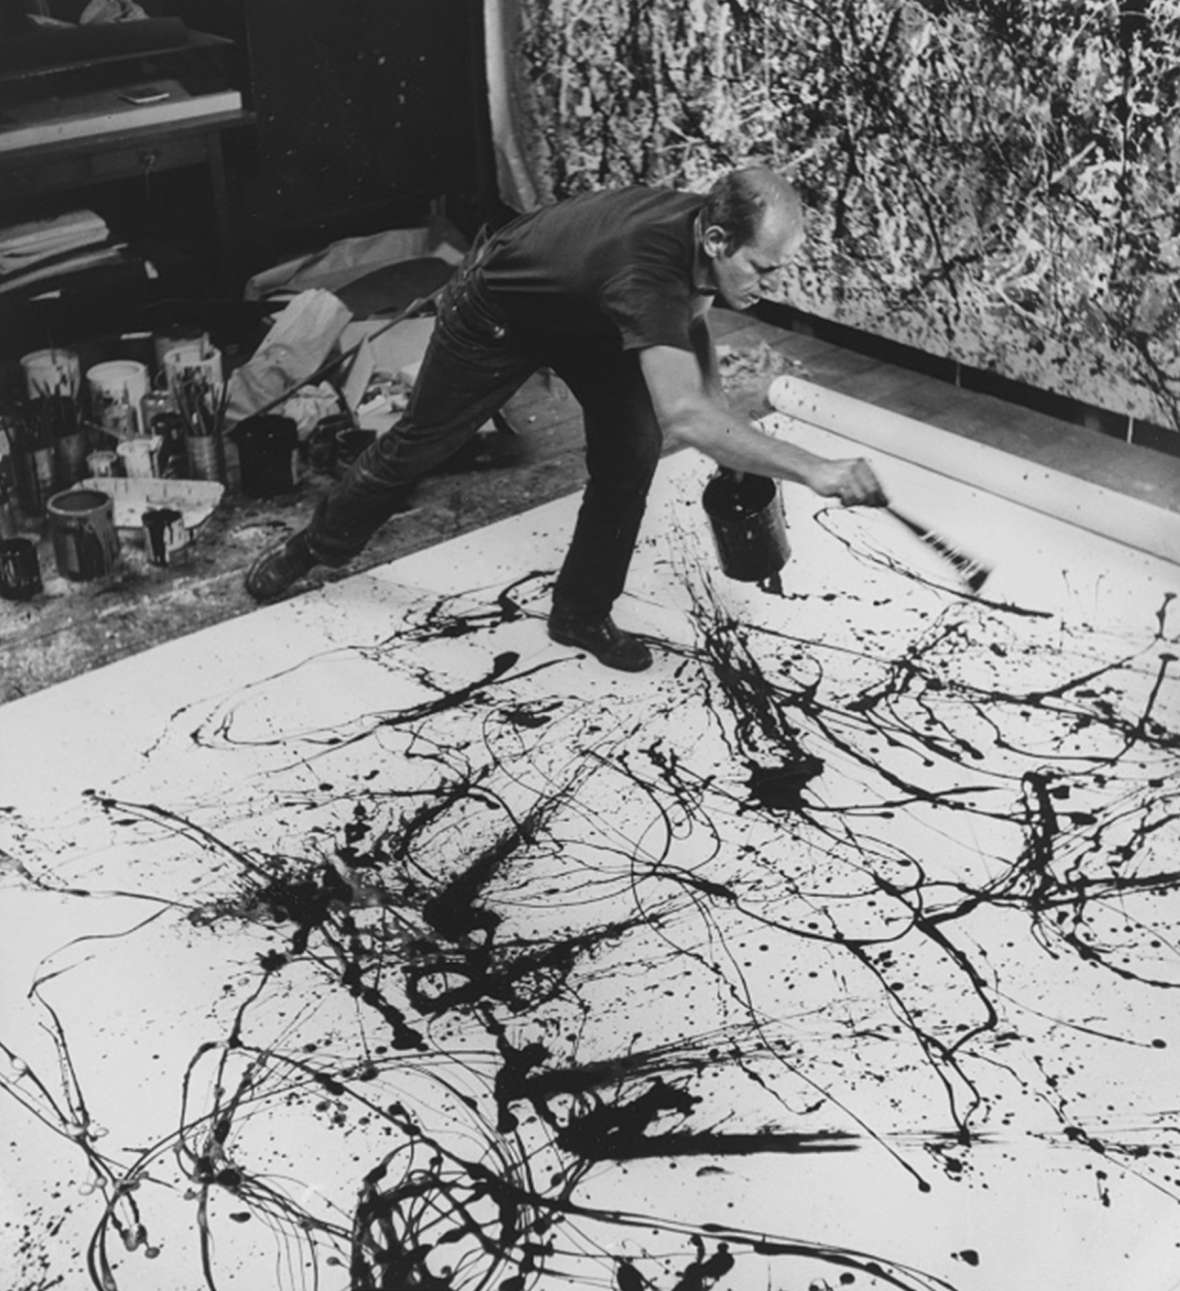 The artist at work in his studio, 1950. In Pollock's great works, you can’t look at a figure, or a form, or even a deeper meaning—so you’re free to focus on the artistic wonder of a line itself. Hans Nelmuth photo, National Portrait Gallery.